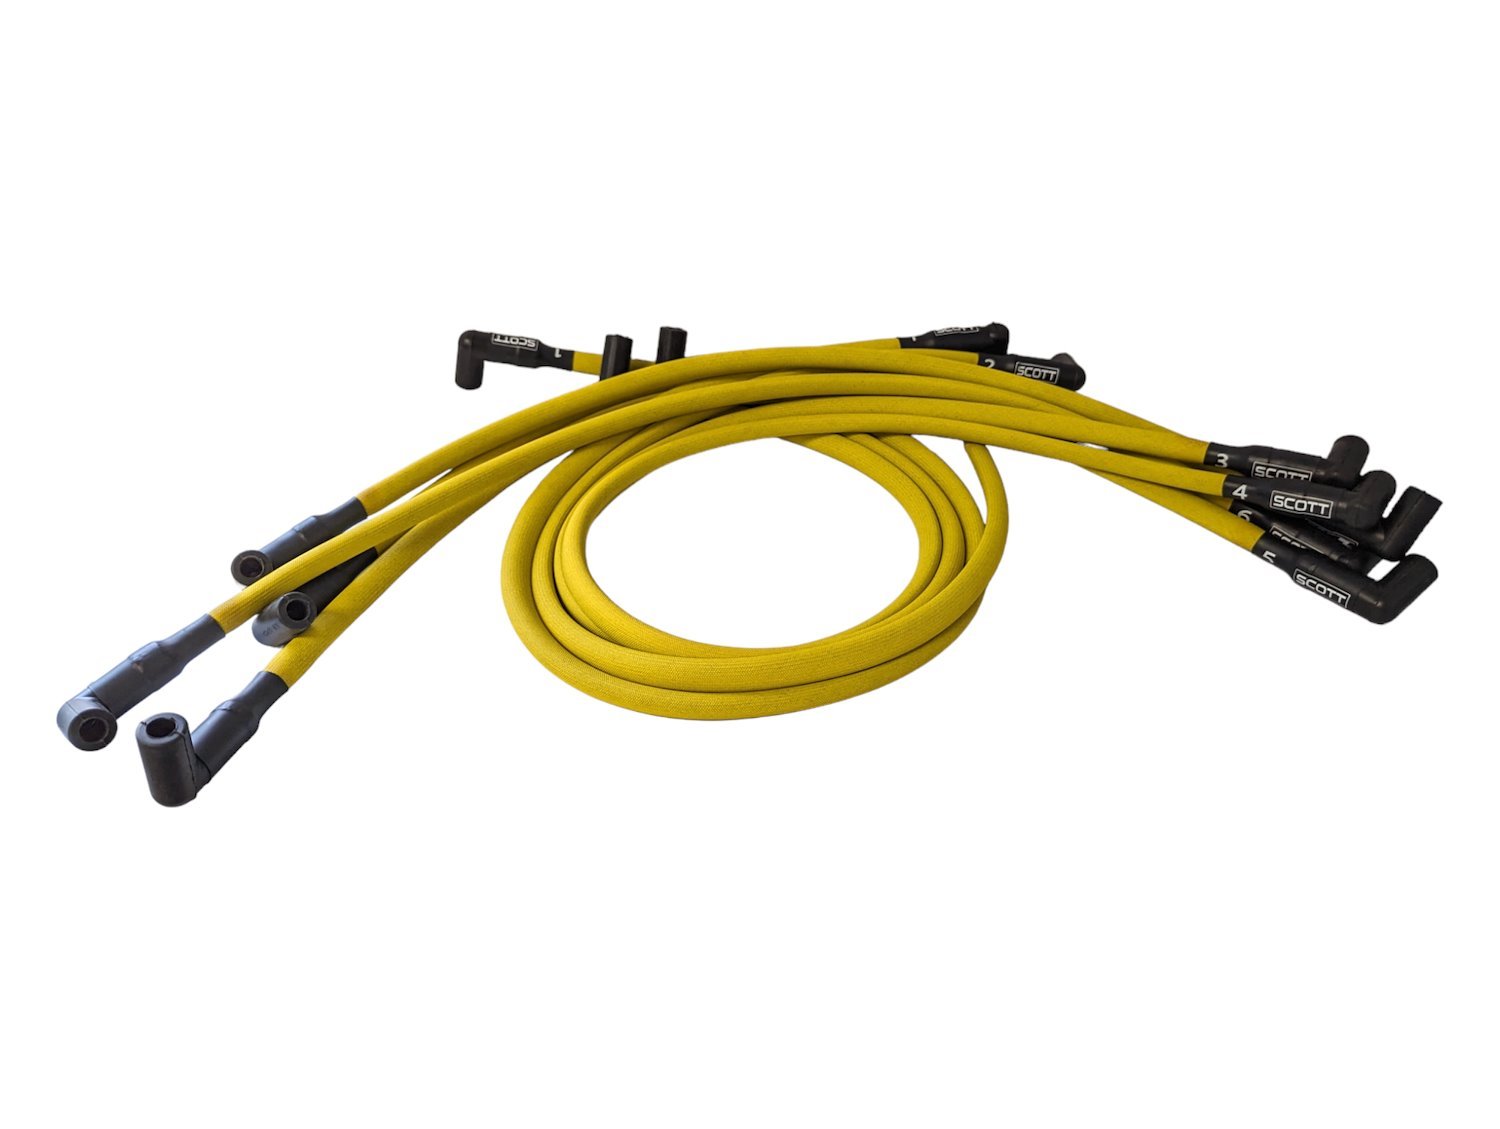 SPW-PS-407-5 High-Performance Fiberglass-Oversleeved Spark Plug Wire Set for Small Block Chevy, Under Header [Yellow]